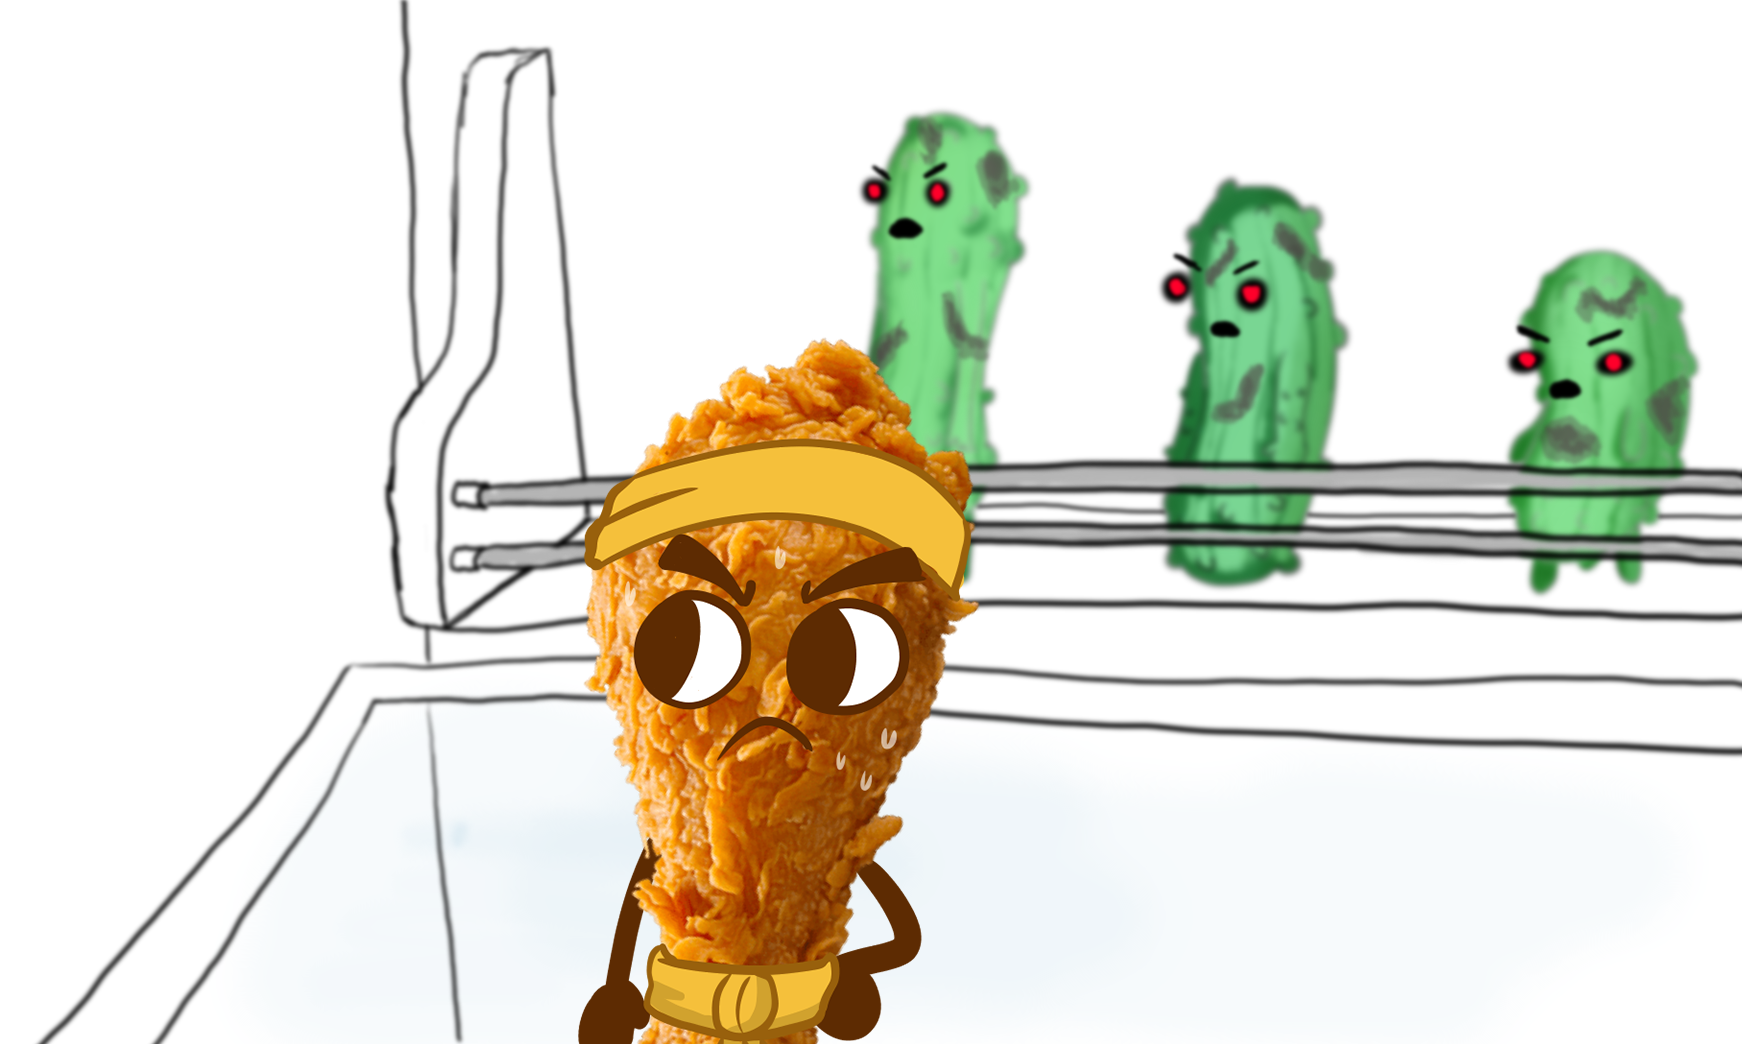 image of a realistic chicken wing with cartoon eyes standing in front of cartoon pickles with red eyes.